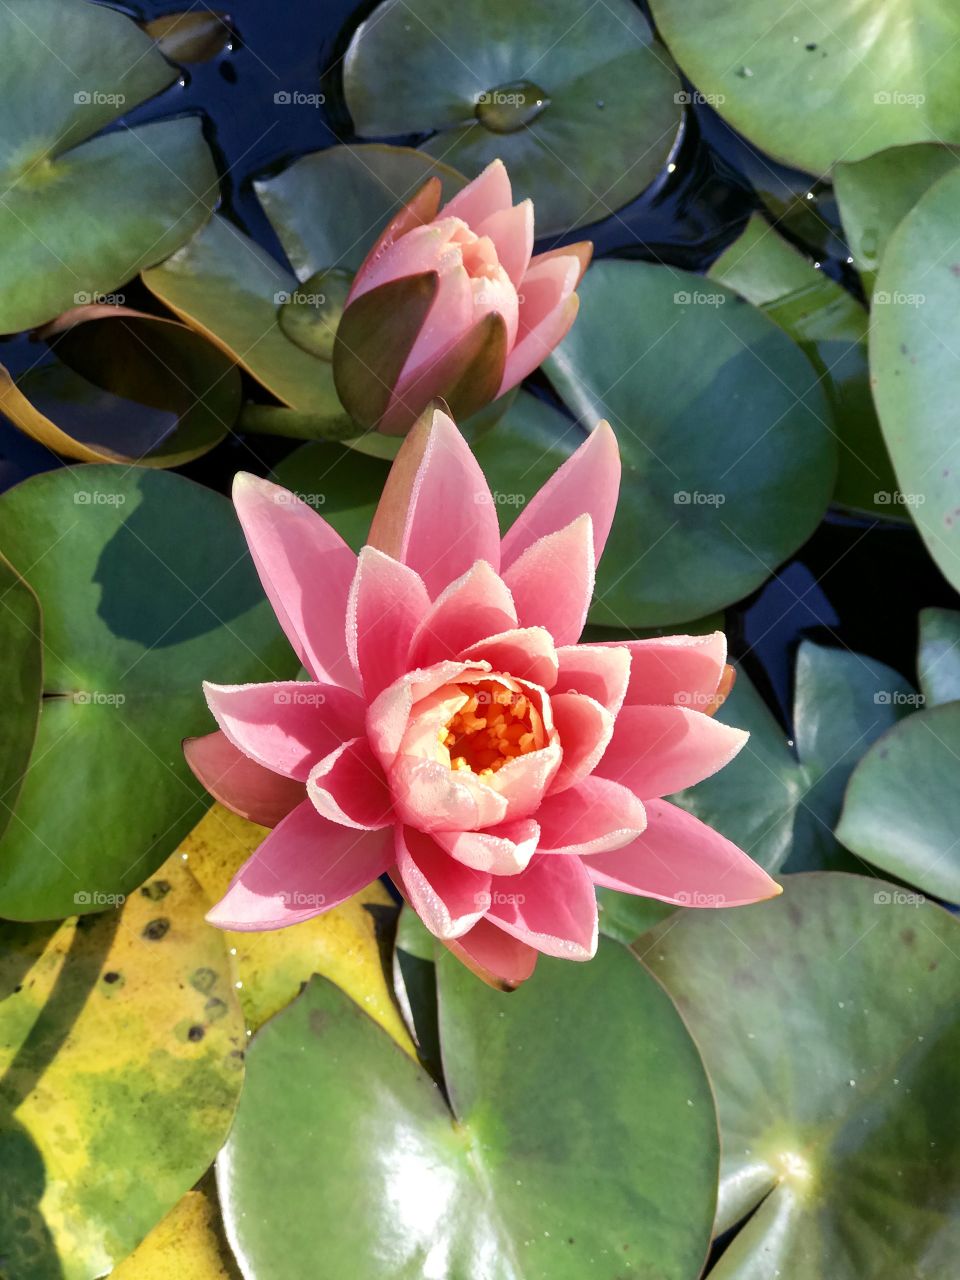 Flower on Lily Pad